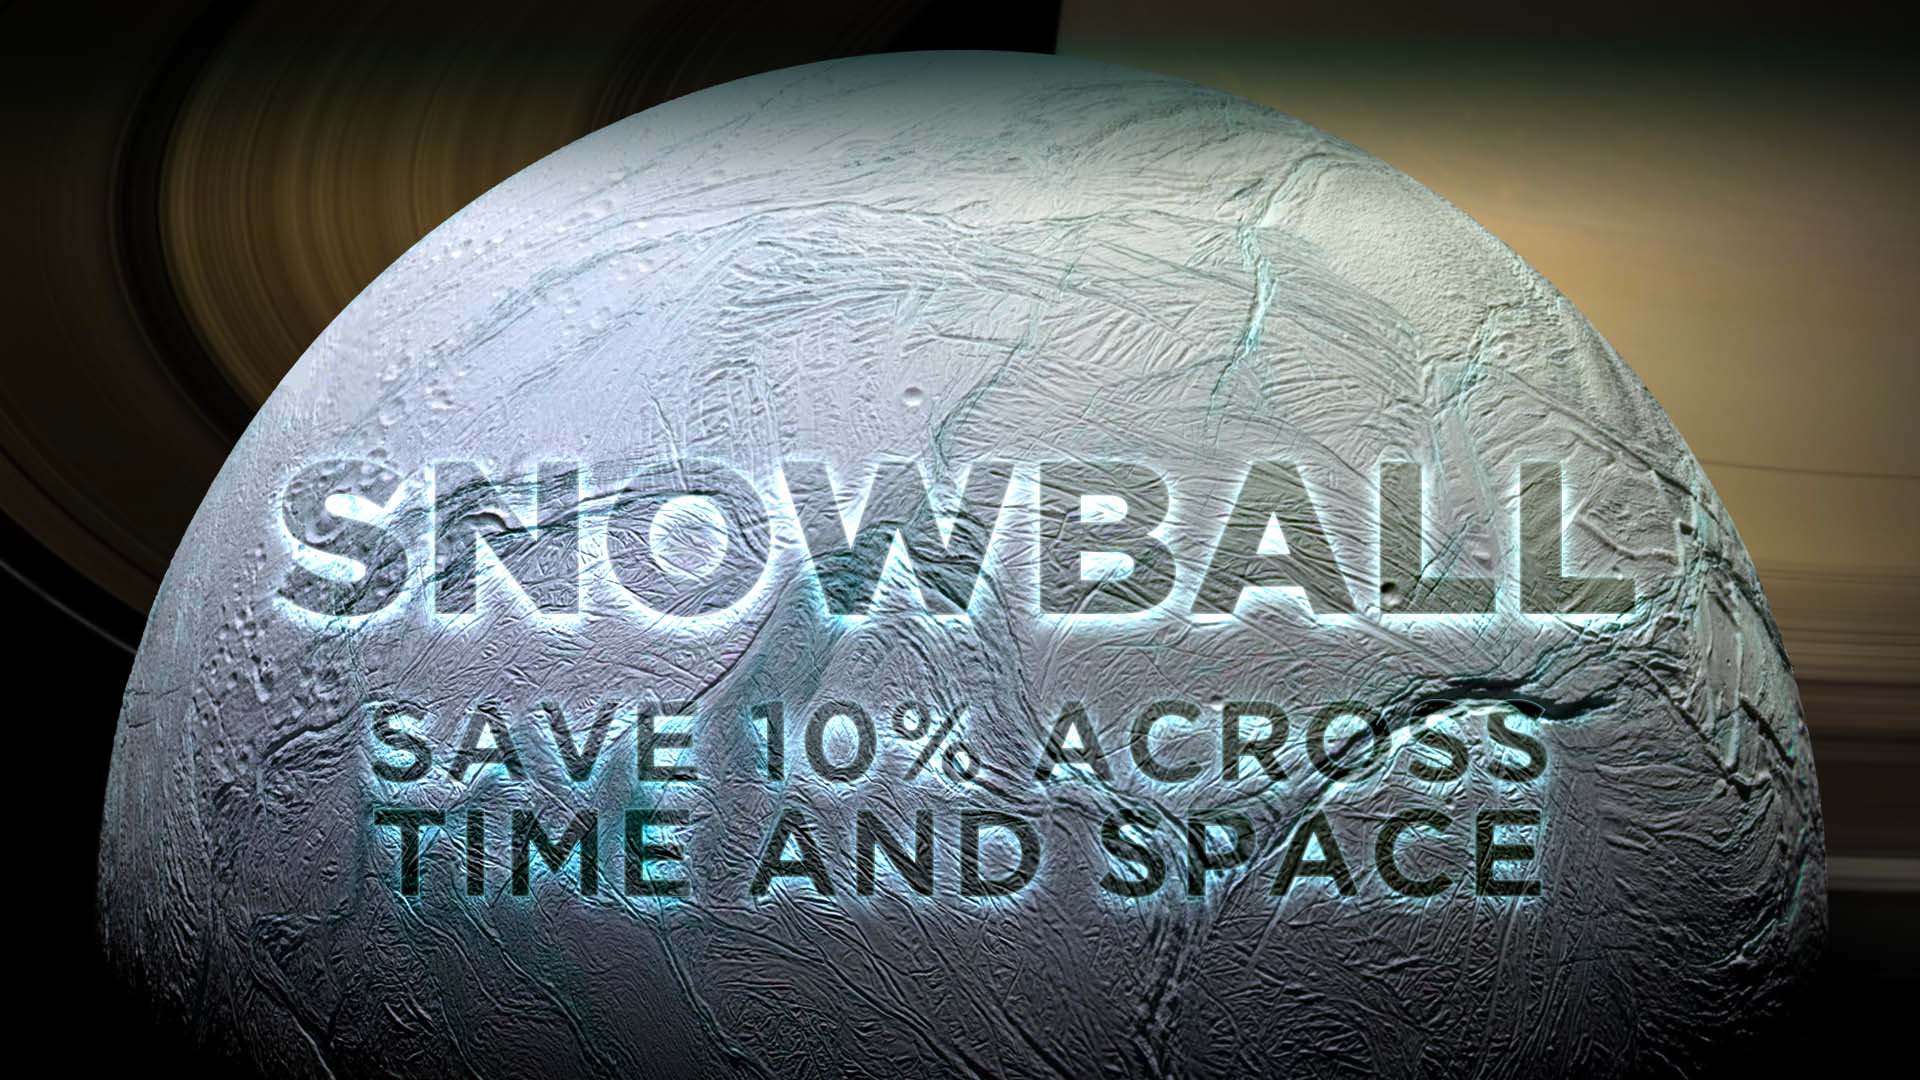 Use Code SNOWBALL and Save 10% - See Details in the Shop!